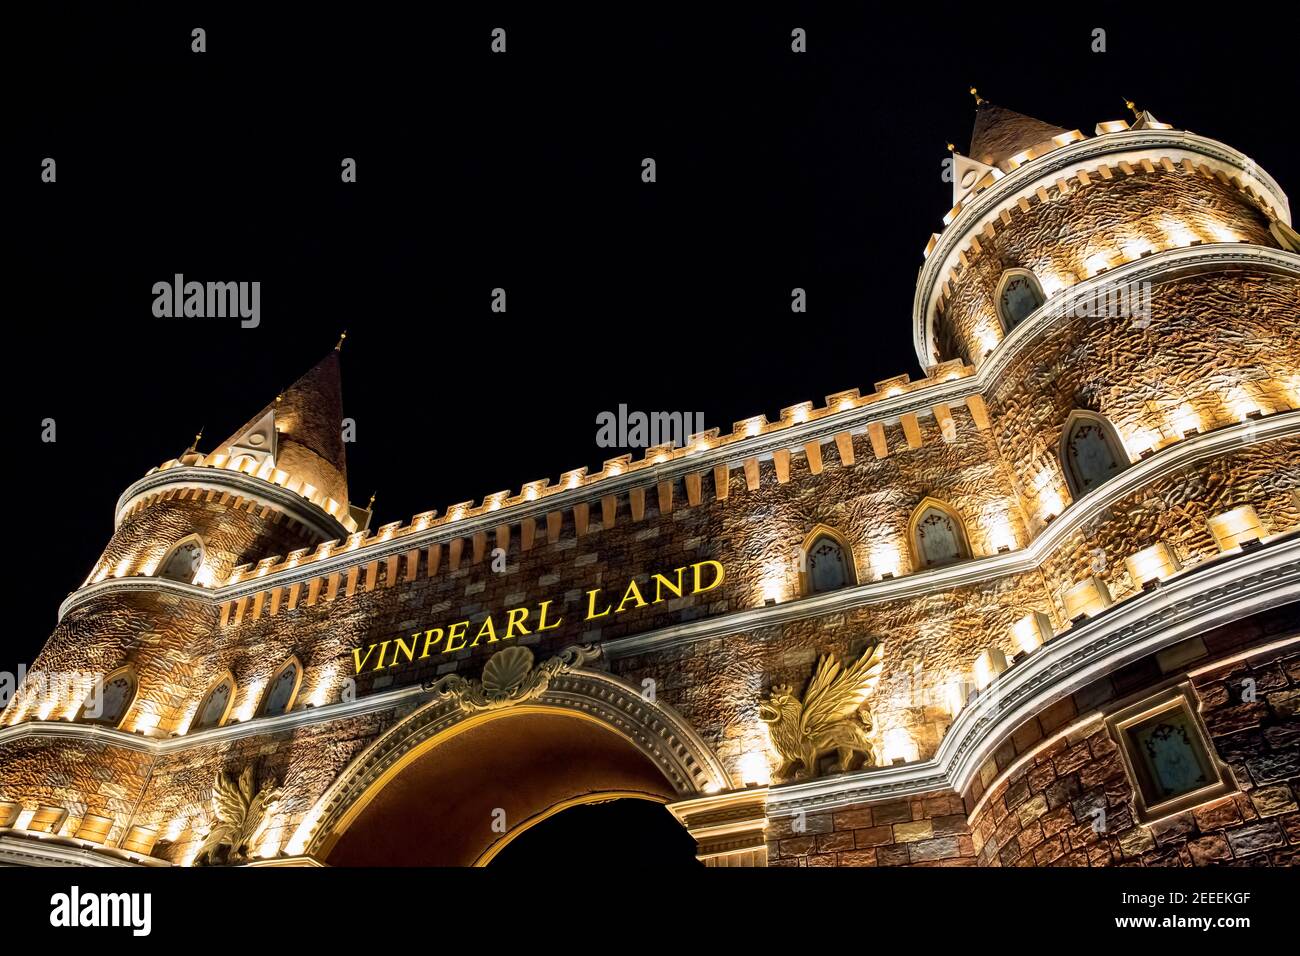 Nha Trang, Vietnam - 24 July, 2019: Amusement Park Vinpearl land, signboard at night time. Evening at Vinpearl adventure park. Fantastic medieval arch Stock Photo